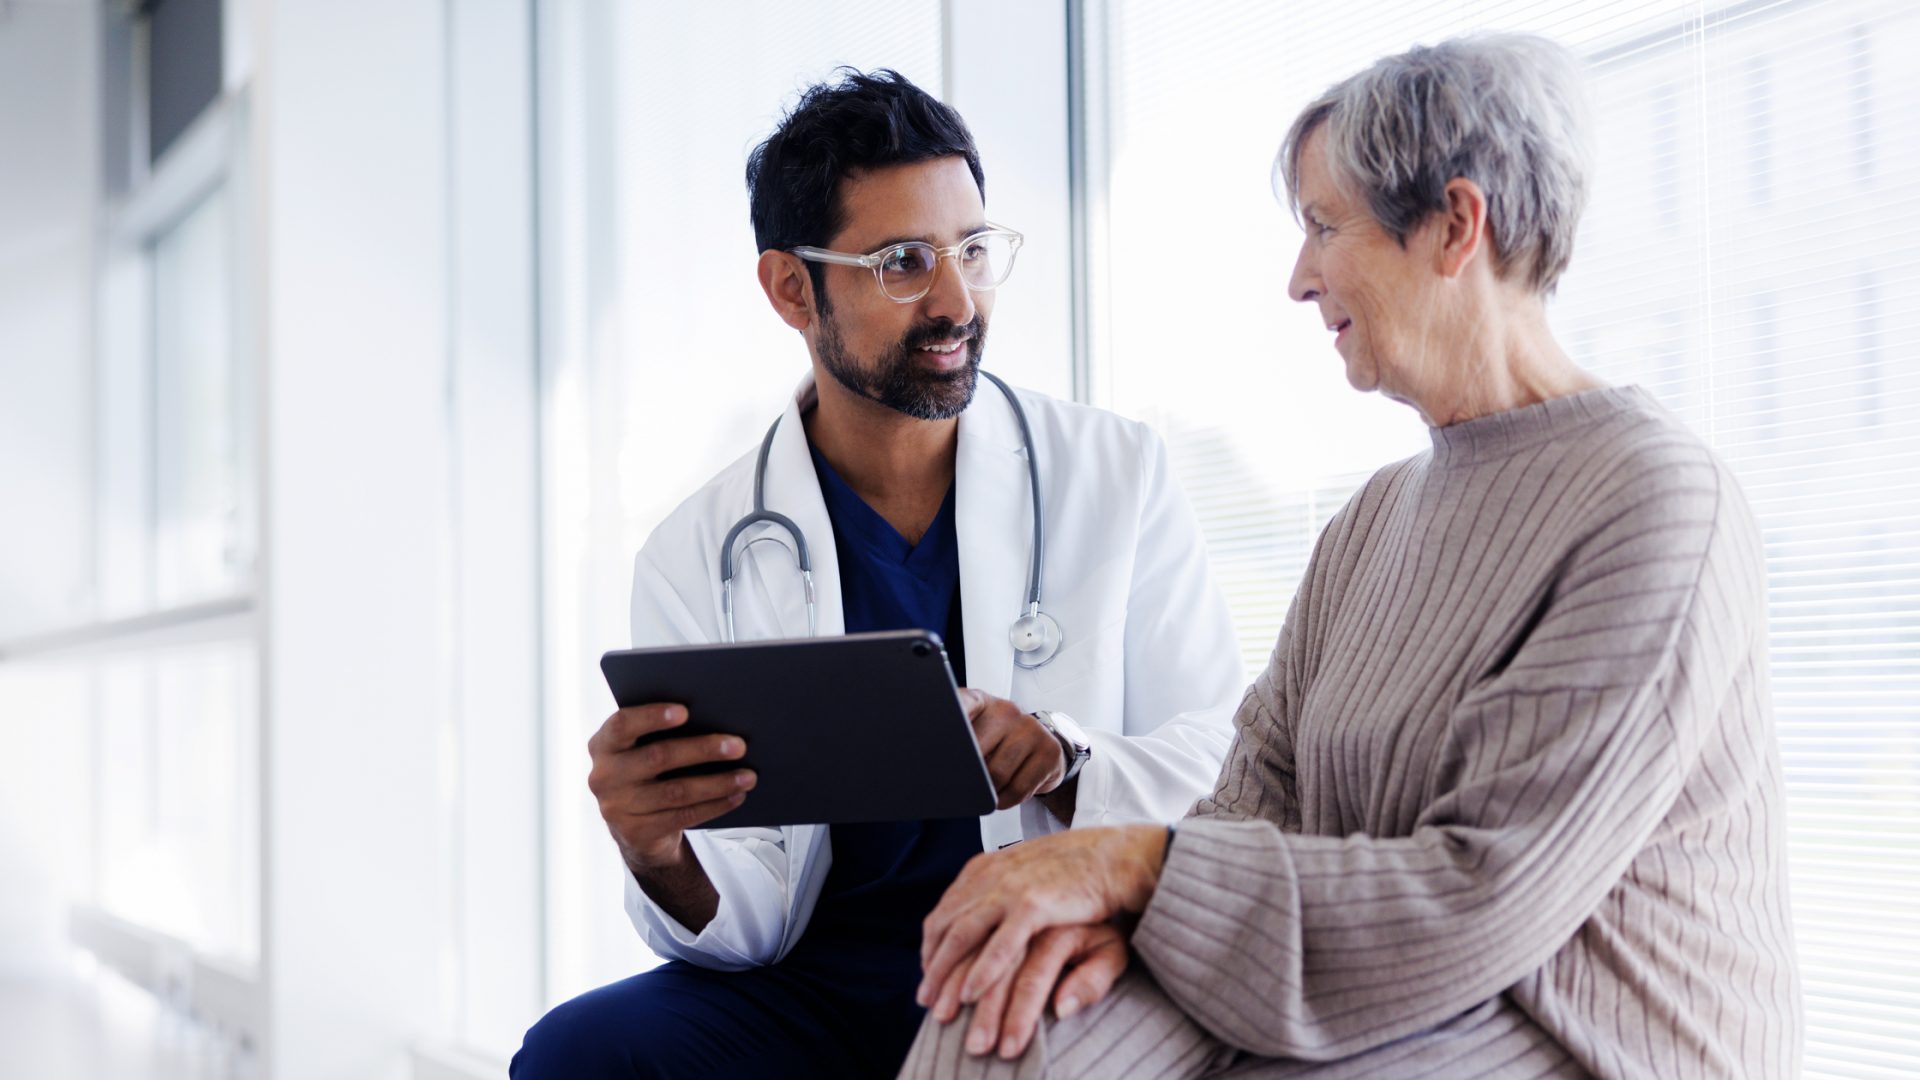 Doctor Reviews Information on Tablet with Older Patient